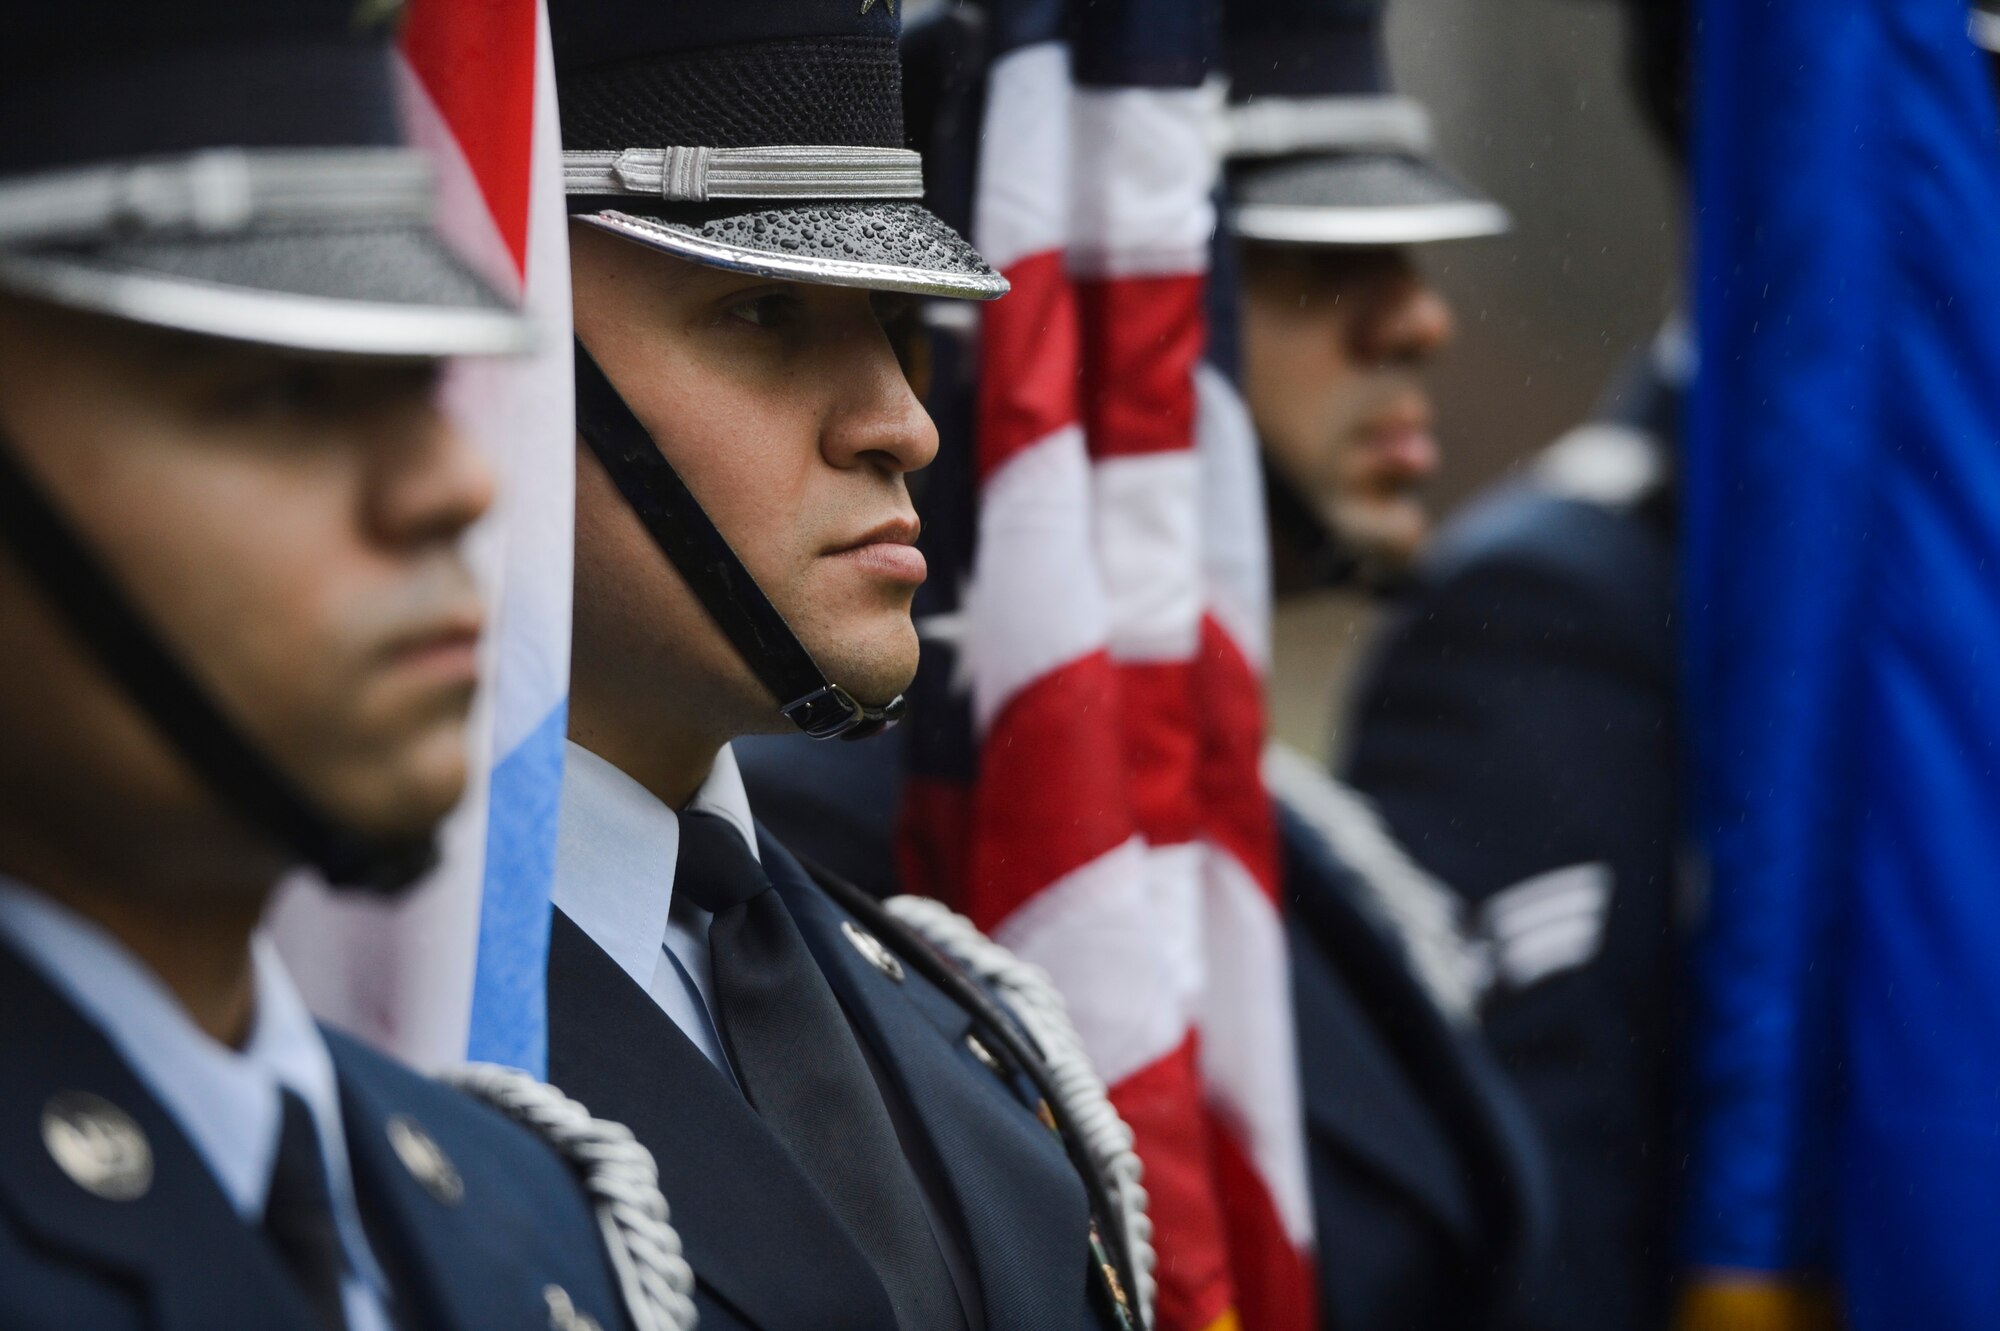 U.S. Air Force Honor Guardsmen, assigned to the 52nd Fighter Wing stand at attention during a Battle of the Bulge anniversary ceremony at the National Liberation Memorial in Schumanns Eck, Luxembourg, Dec. 16, 2015. The ceremony commemorated the 71st anniversary of the beginning of the battle which began on Dec. 16, 1944. (U.S. Air Force photo by Staff Sgt. Christopher Ruano/Released)